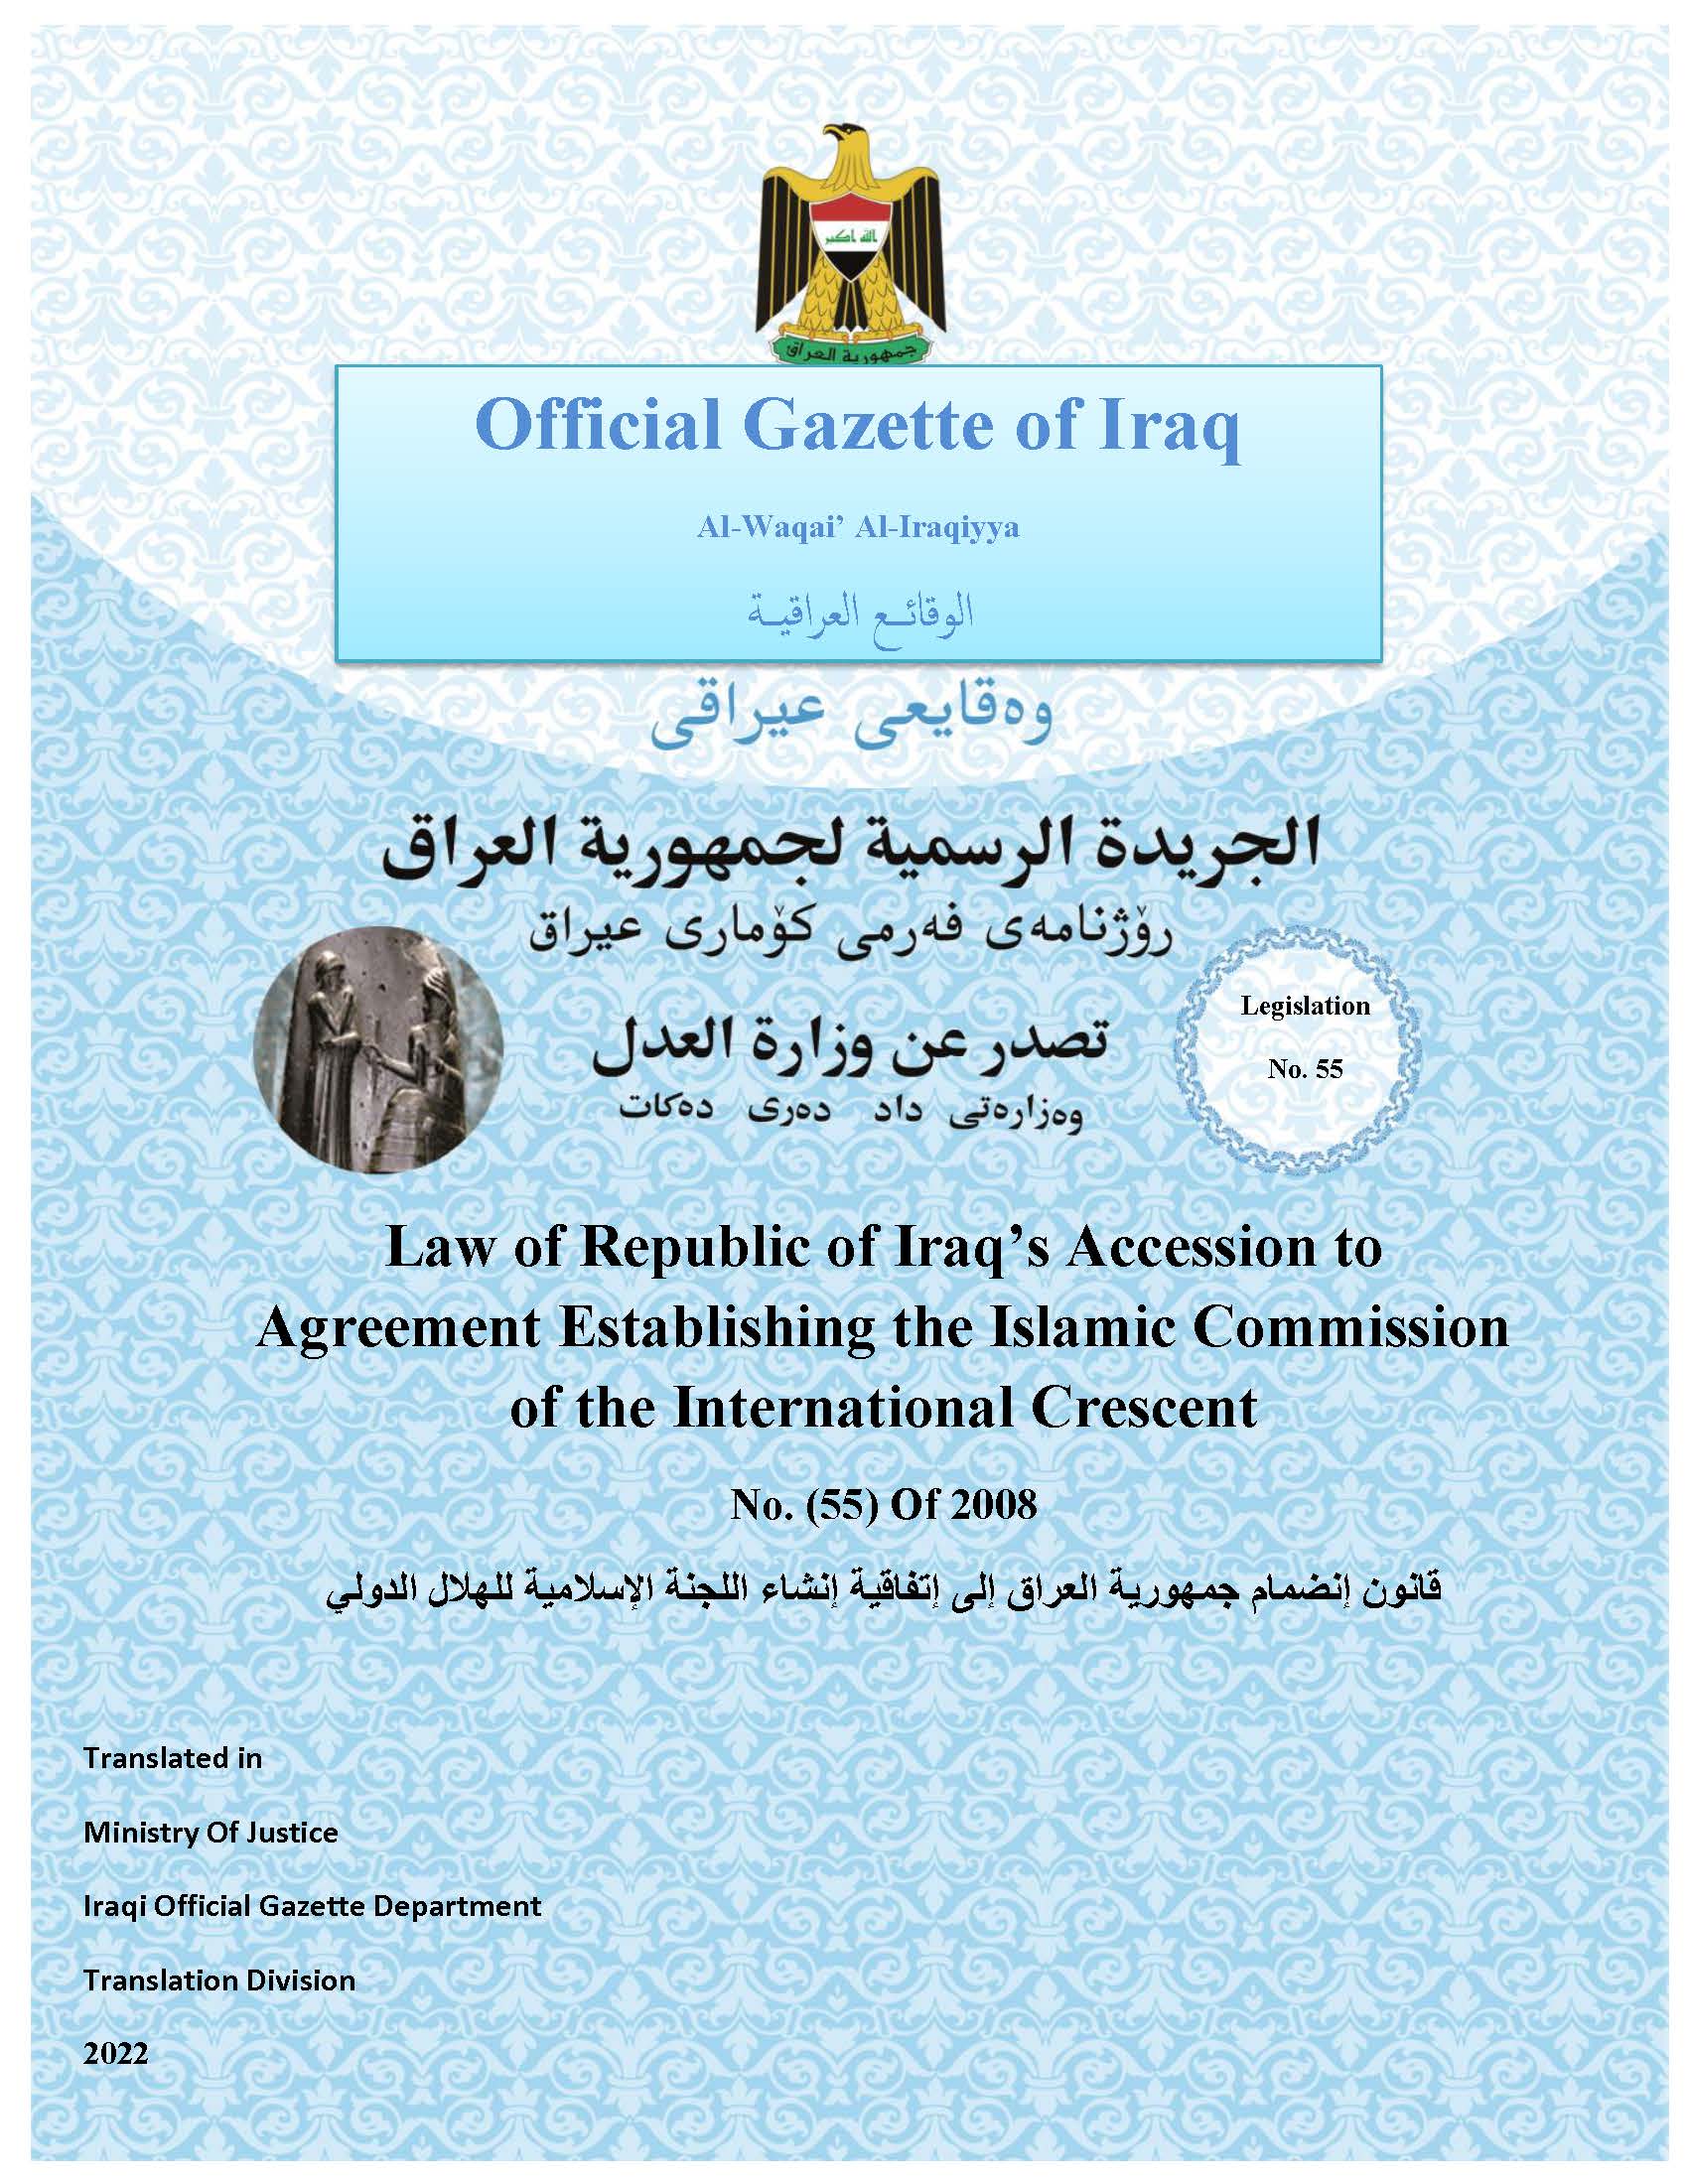        Law of Repuplic of Iraq`s Accession to Agreement Establishing the Islamic Commission of the International Crescent No.(55) Of 2008